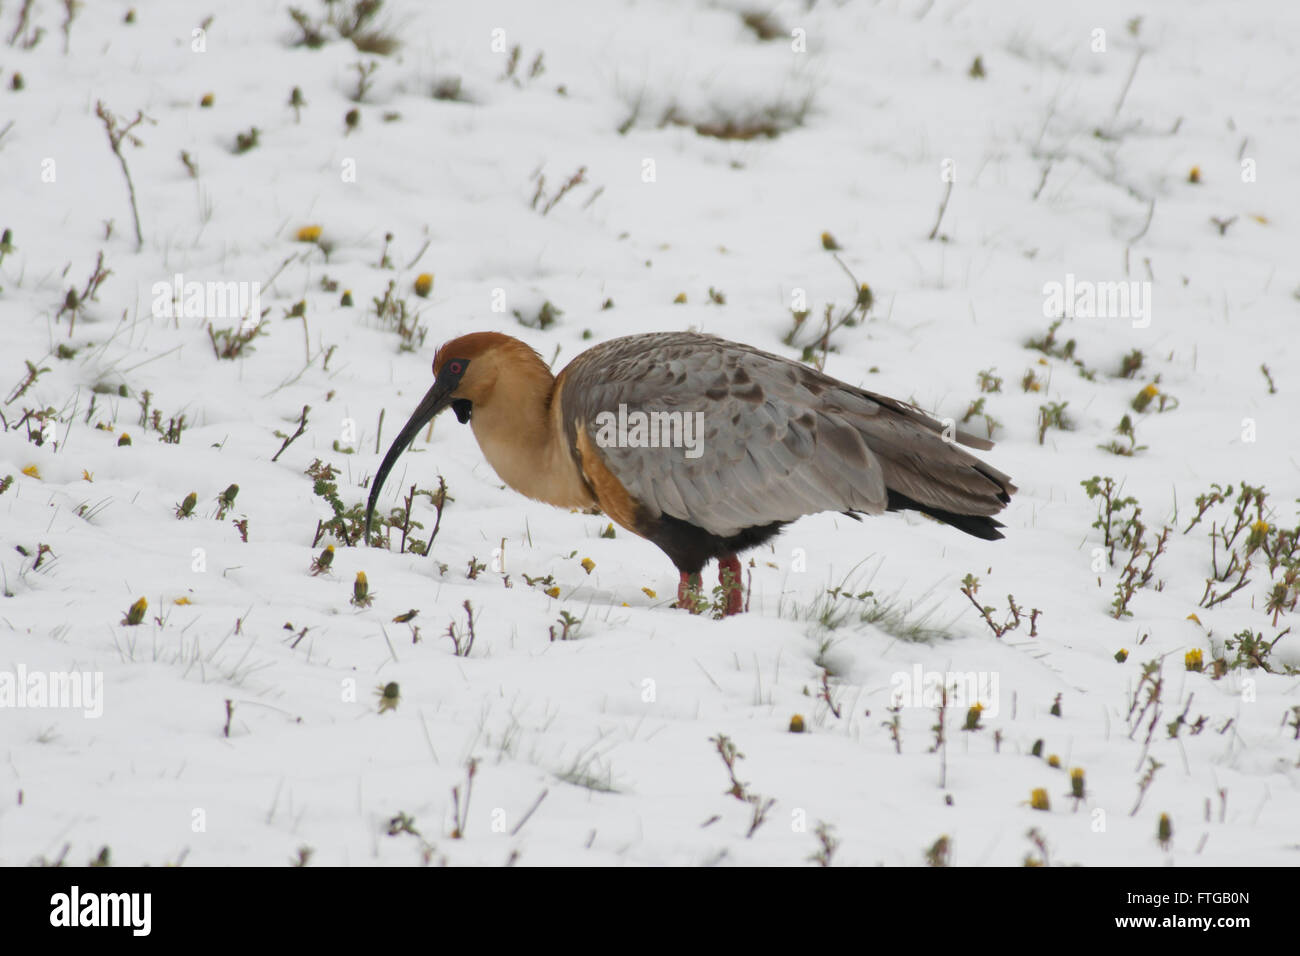 Black-faced ibis staying on the snow in Tierra del Fuego National Park. Typical argentinian bird called Bandurria Austral Stock Photo